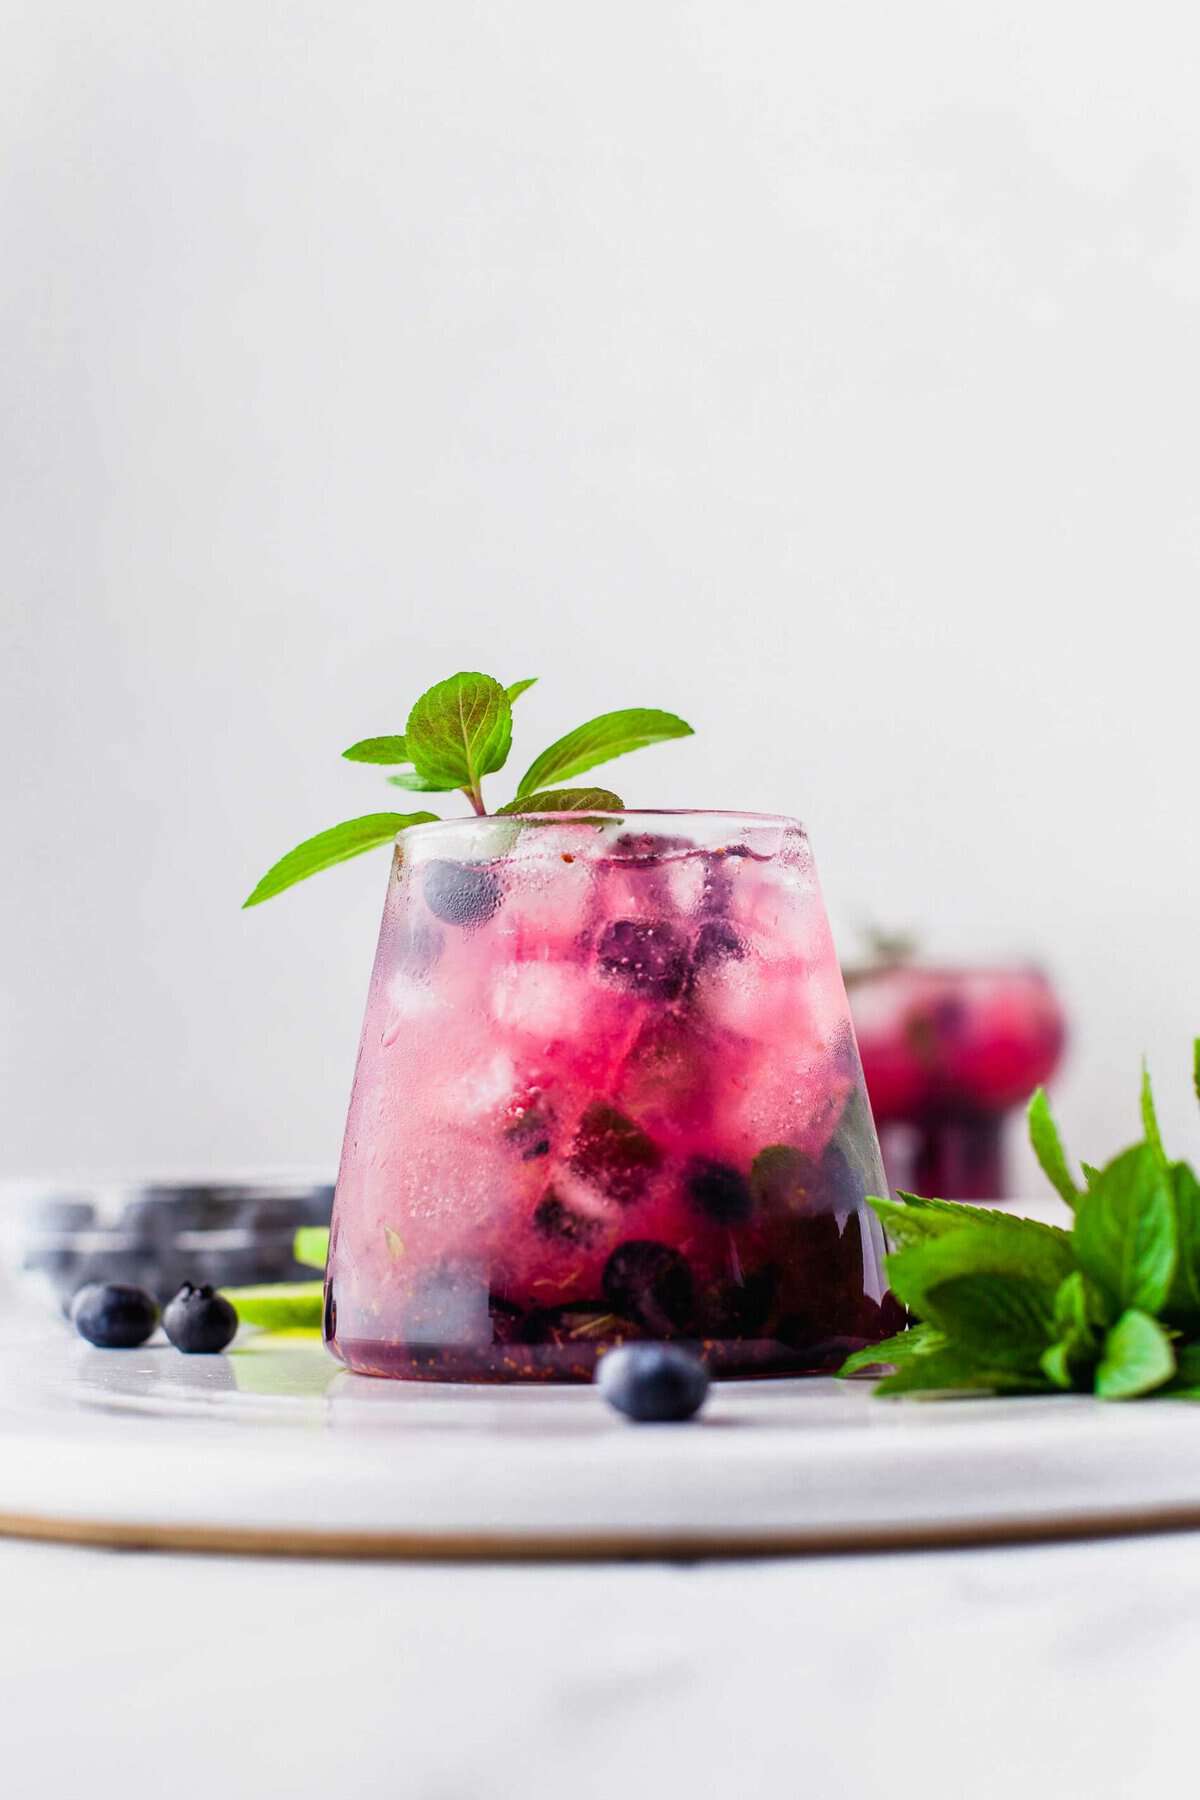 Blueberry mojito garnished with sprig of mint leaves